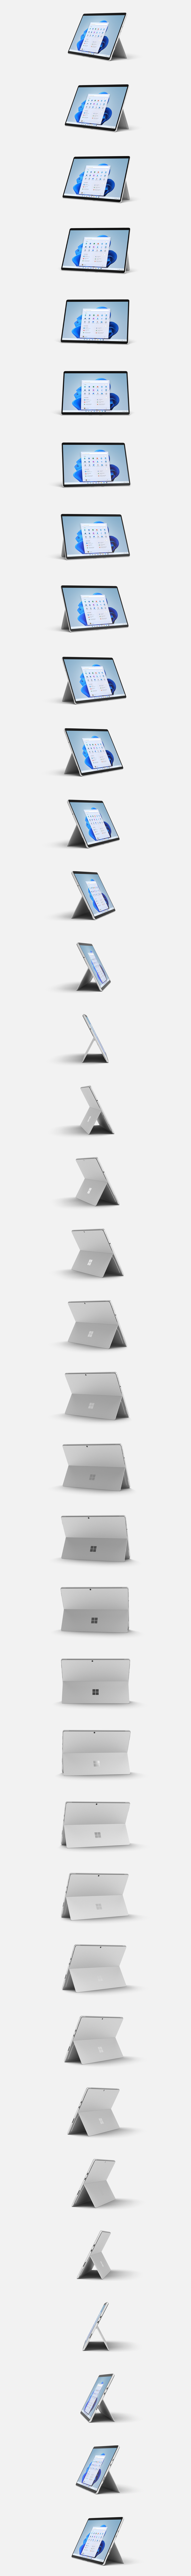 Surface Pro 8 for Business.